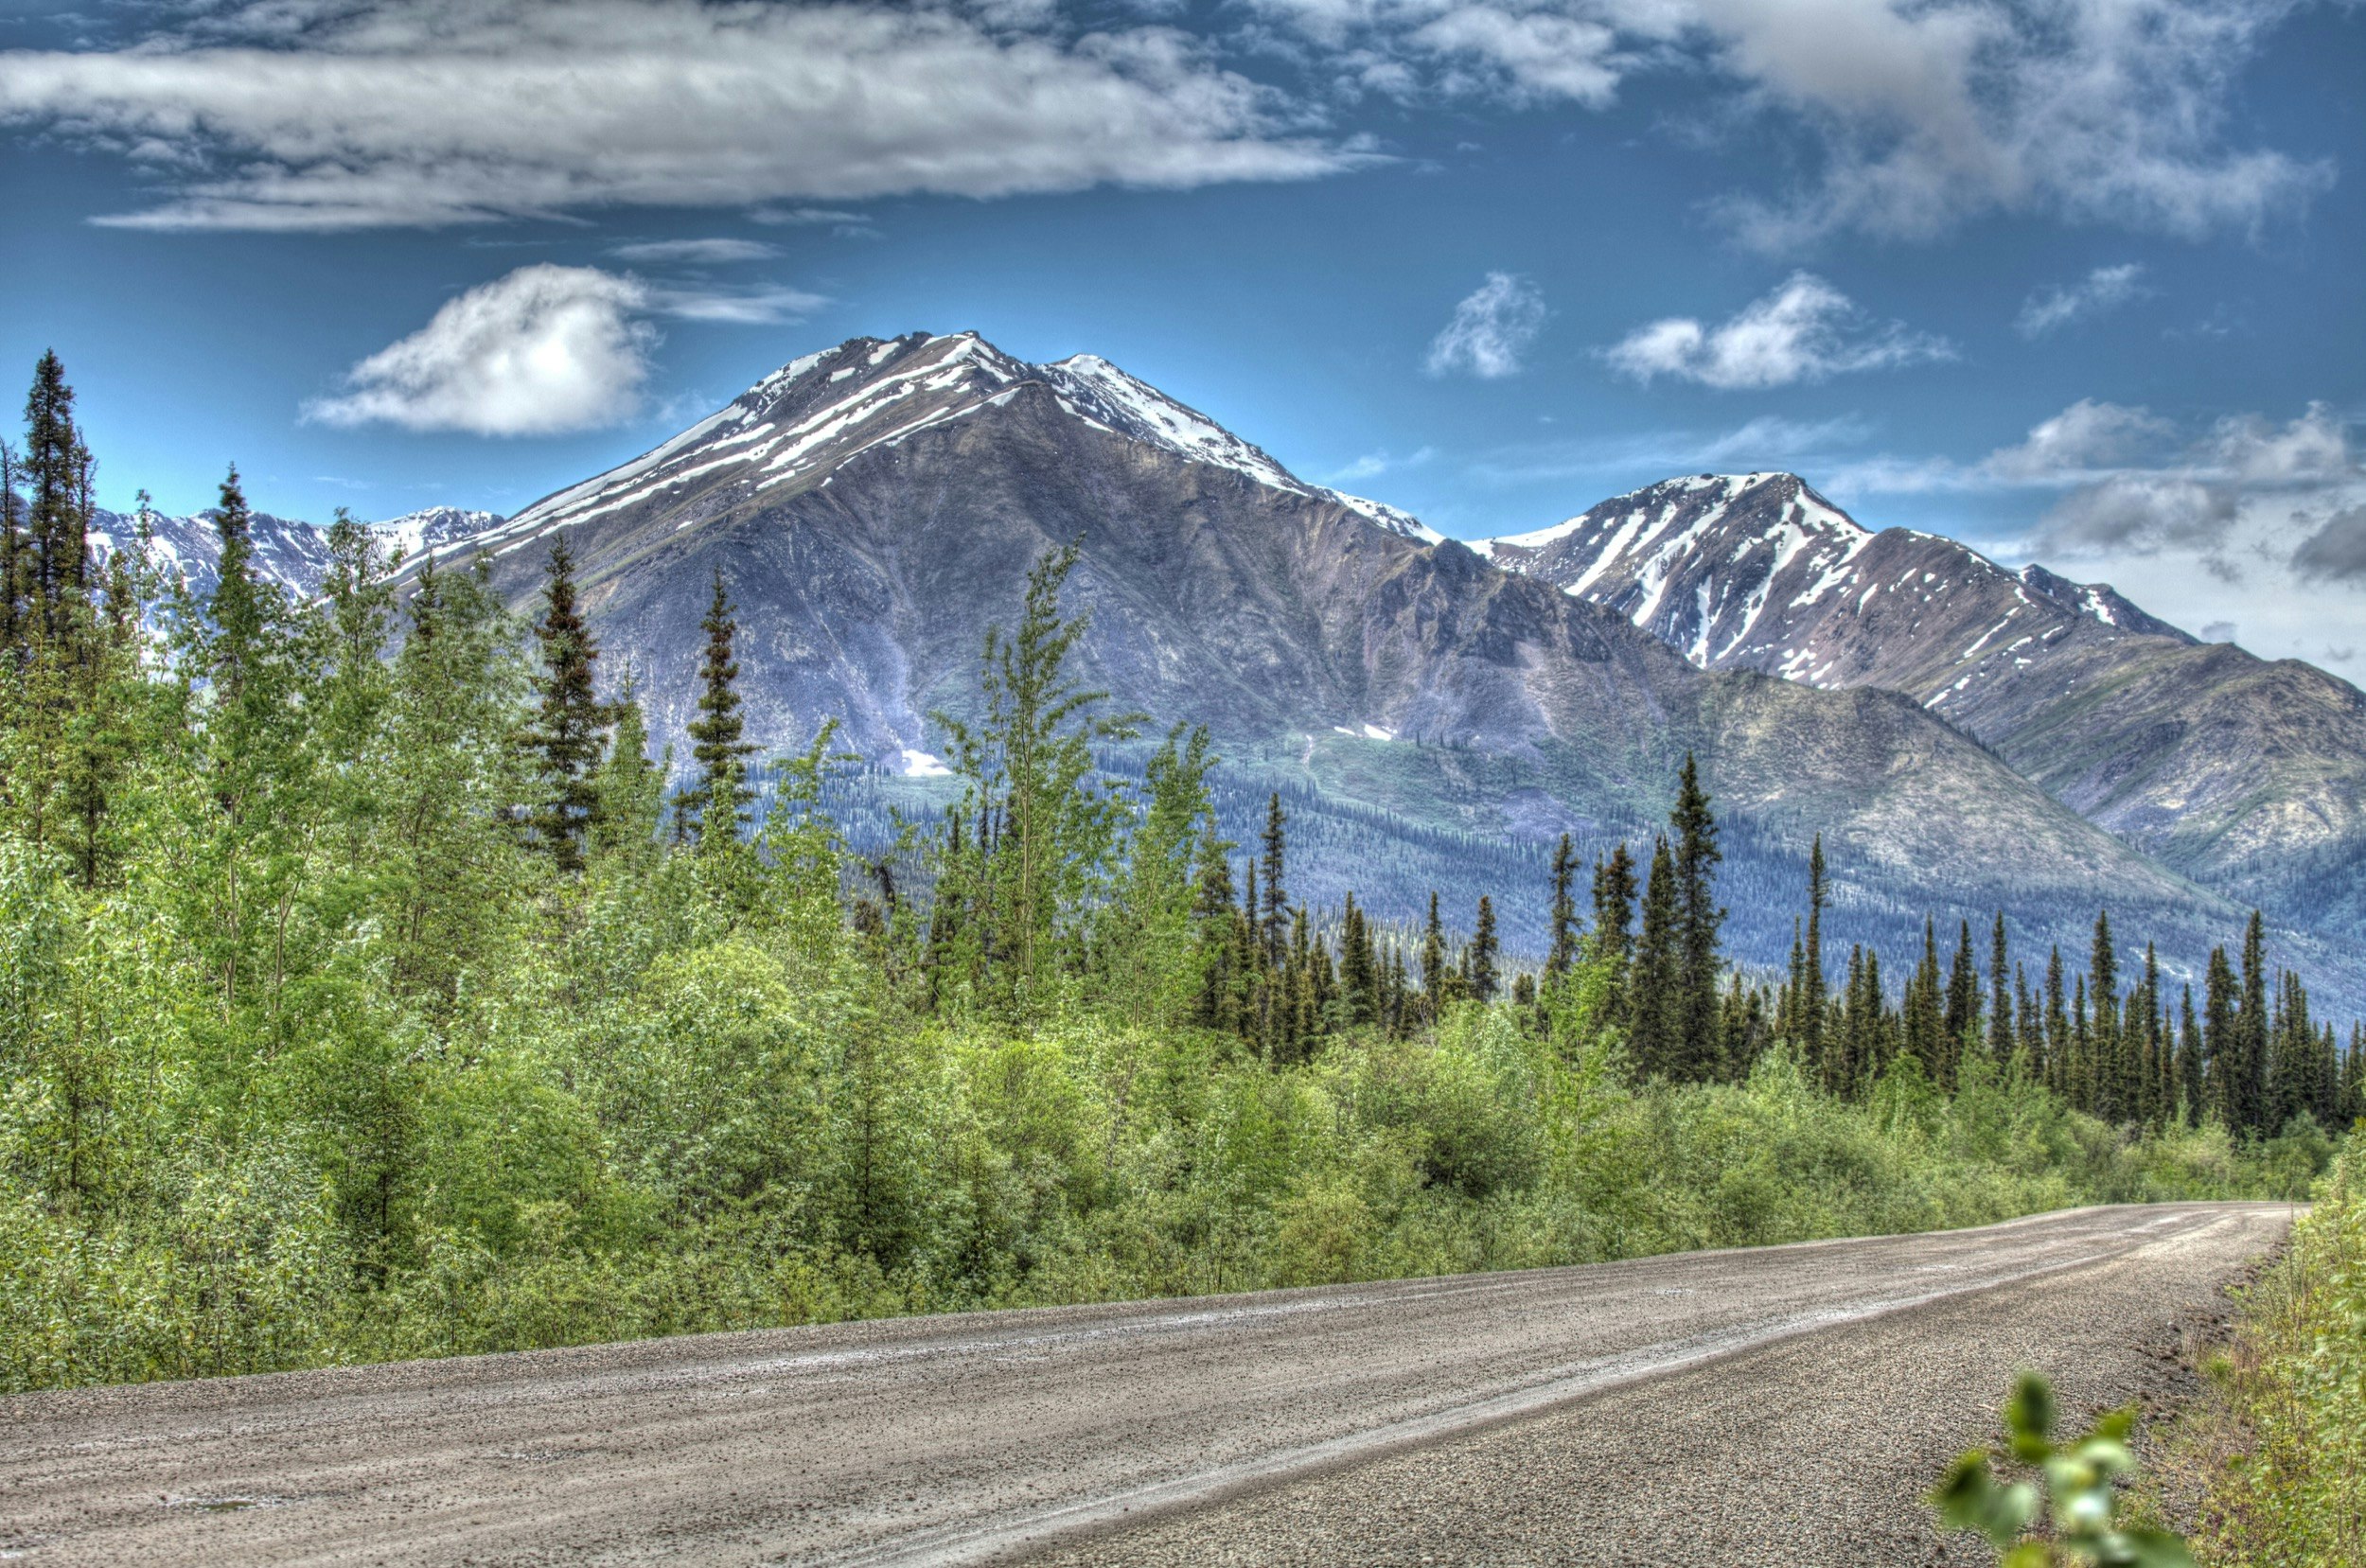 A rocky shale road - the Dempster Highway - runs through an evergreen forest at the base of a snow-covered mountain in the Yukon Territory